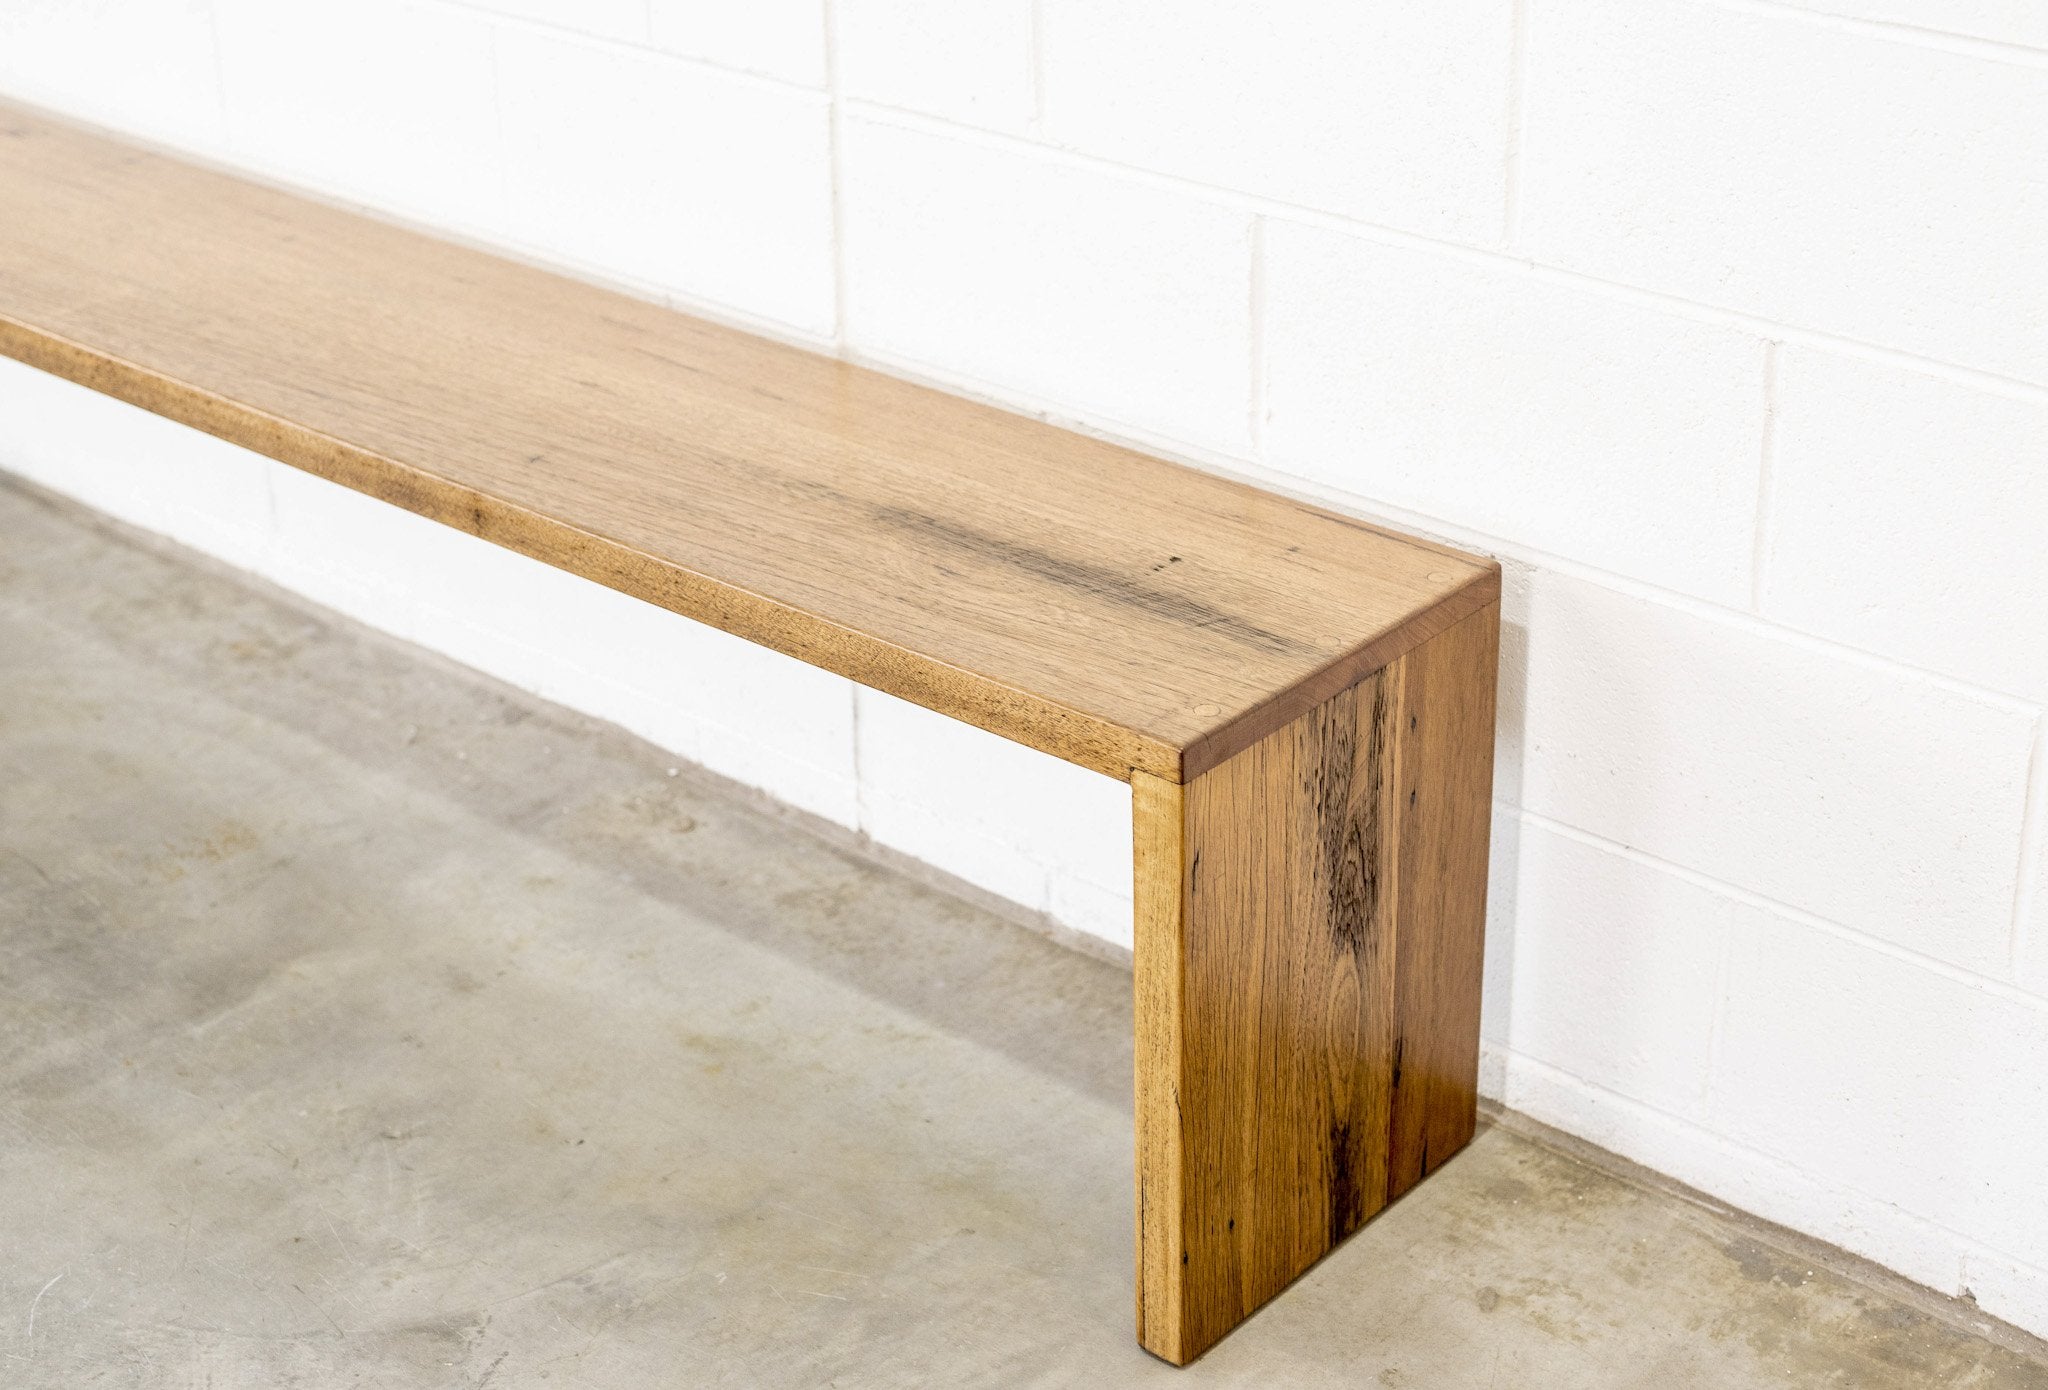 Nd Recycled Timber Furniture Waterfall Bench Seat Nd Furniture